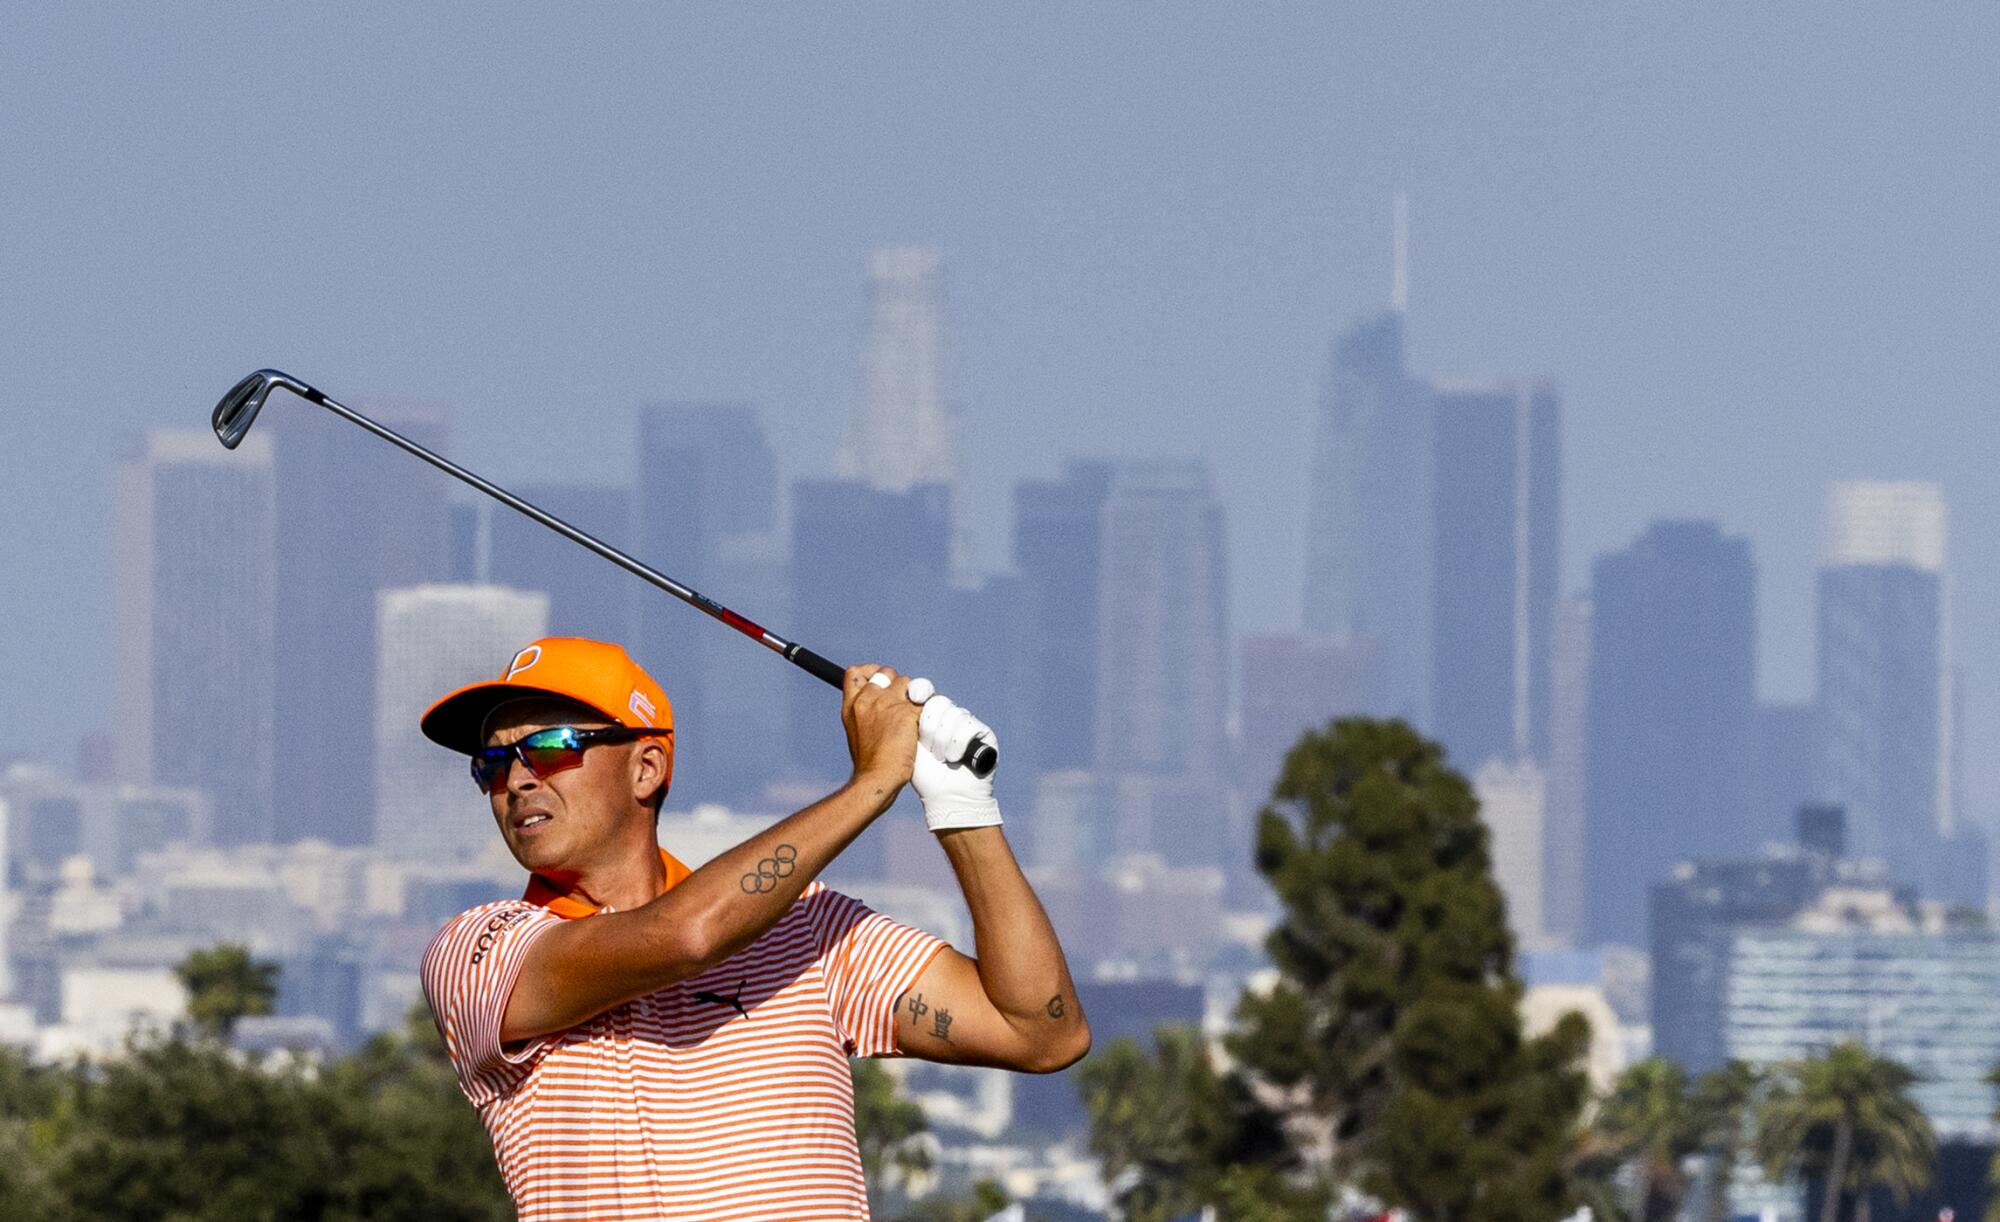 Rickie Fowler hits a fairway shot during the final round of the U.S. Open with the downtown L.A. skyline in the background.